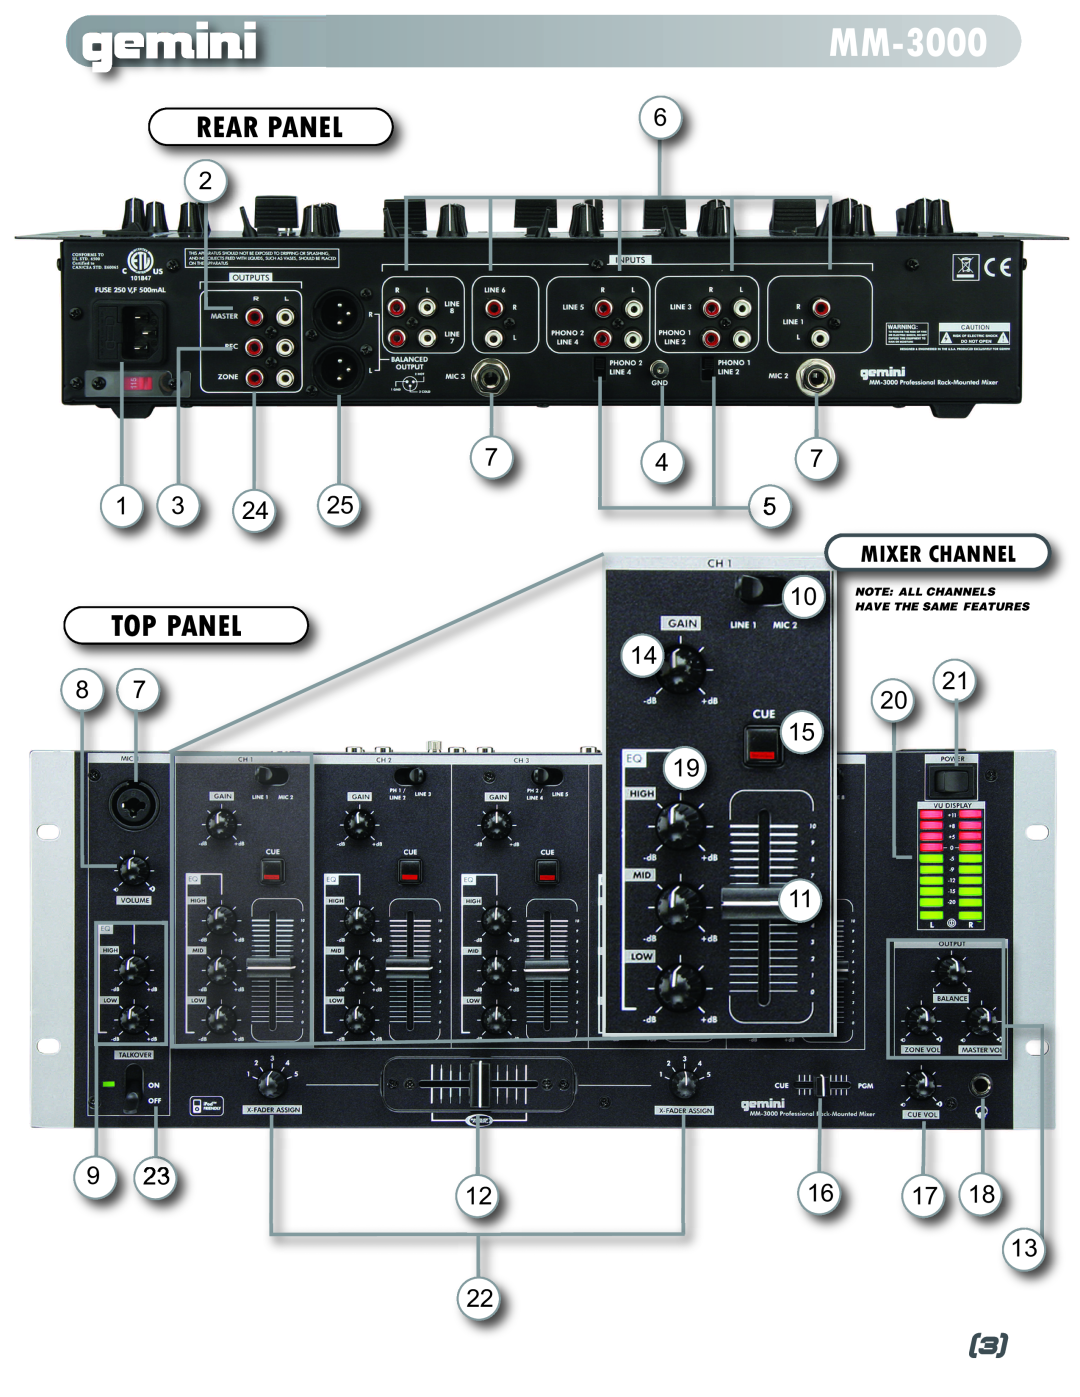 Gemini MM-3000 manual Rear Panel, Top Panel, 1 3 24, Mixer Channel, Note All Channels Have The Same Features 